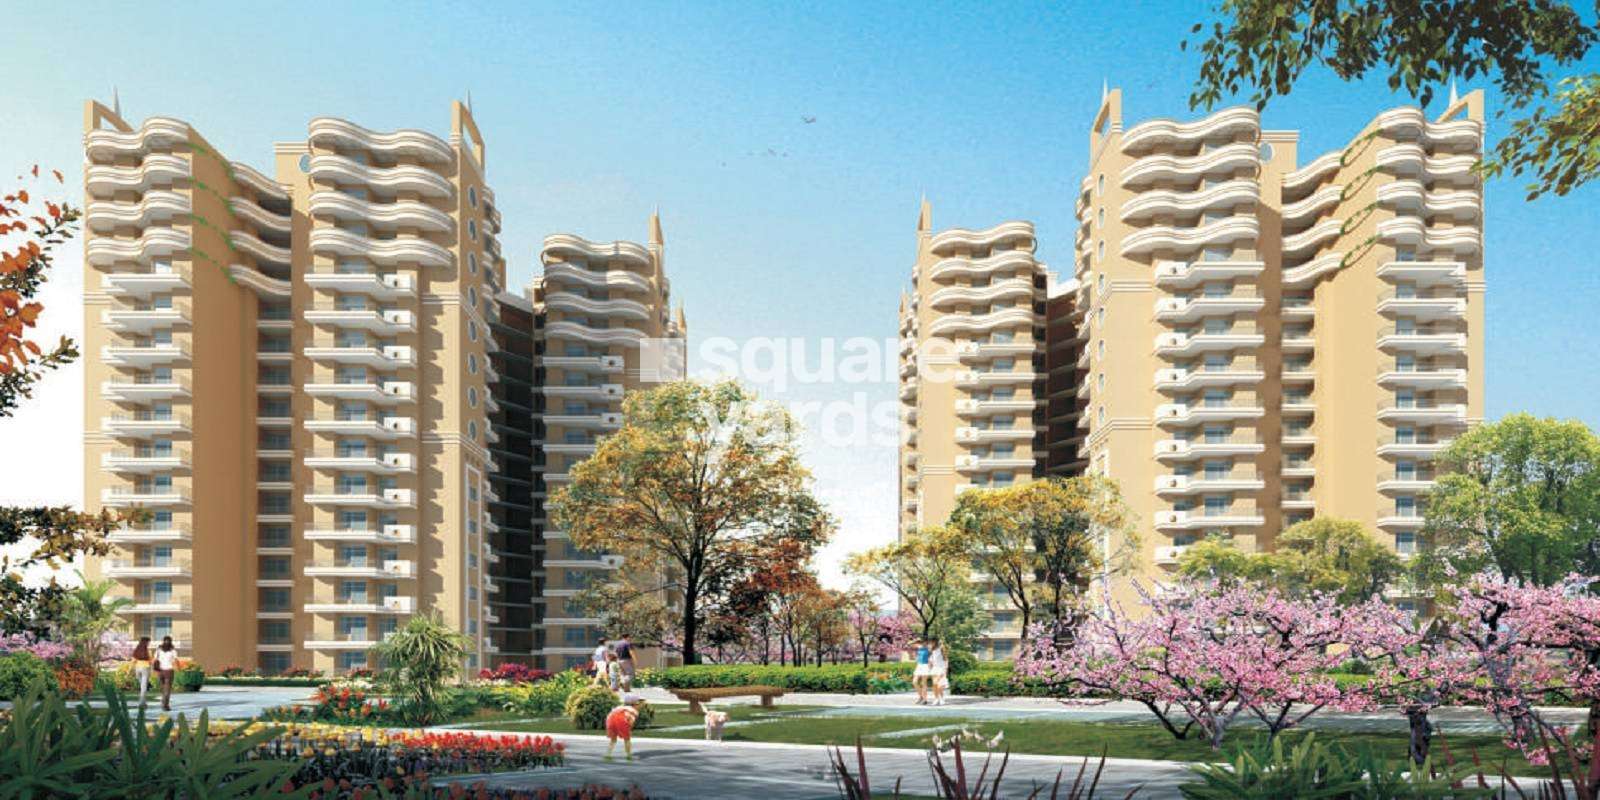 Keltech Golf Vista - Price on Request, 3 Beds BHK Floor Plans Available in  Dundahera, Ghaziabad